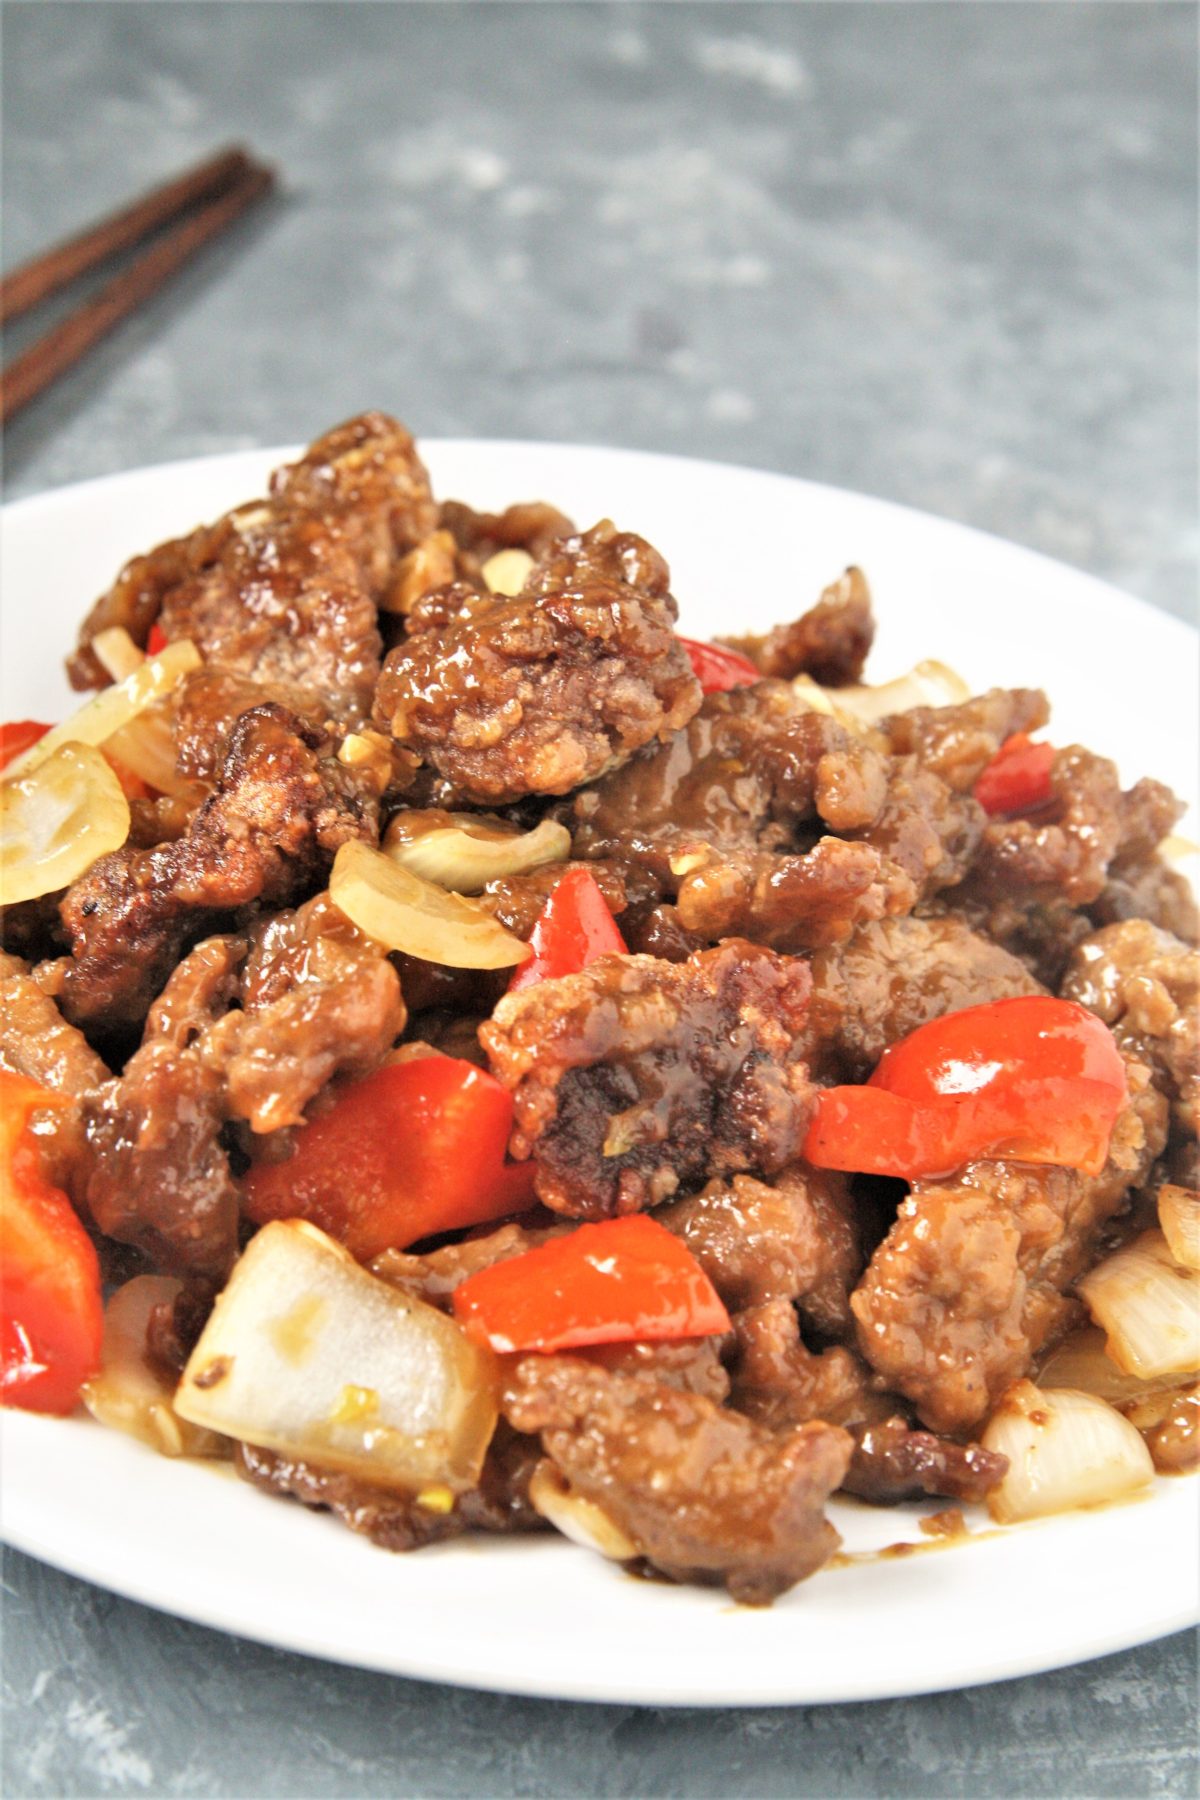 Crispy strips of beef tossed in an addictive sweet and spicy sauce with onions and peppers, this Panda Express Copycat Beijing Beef will become a dinner staple your family will love!